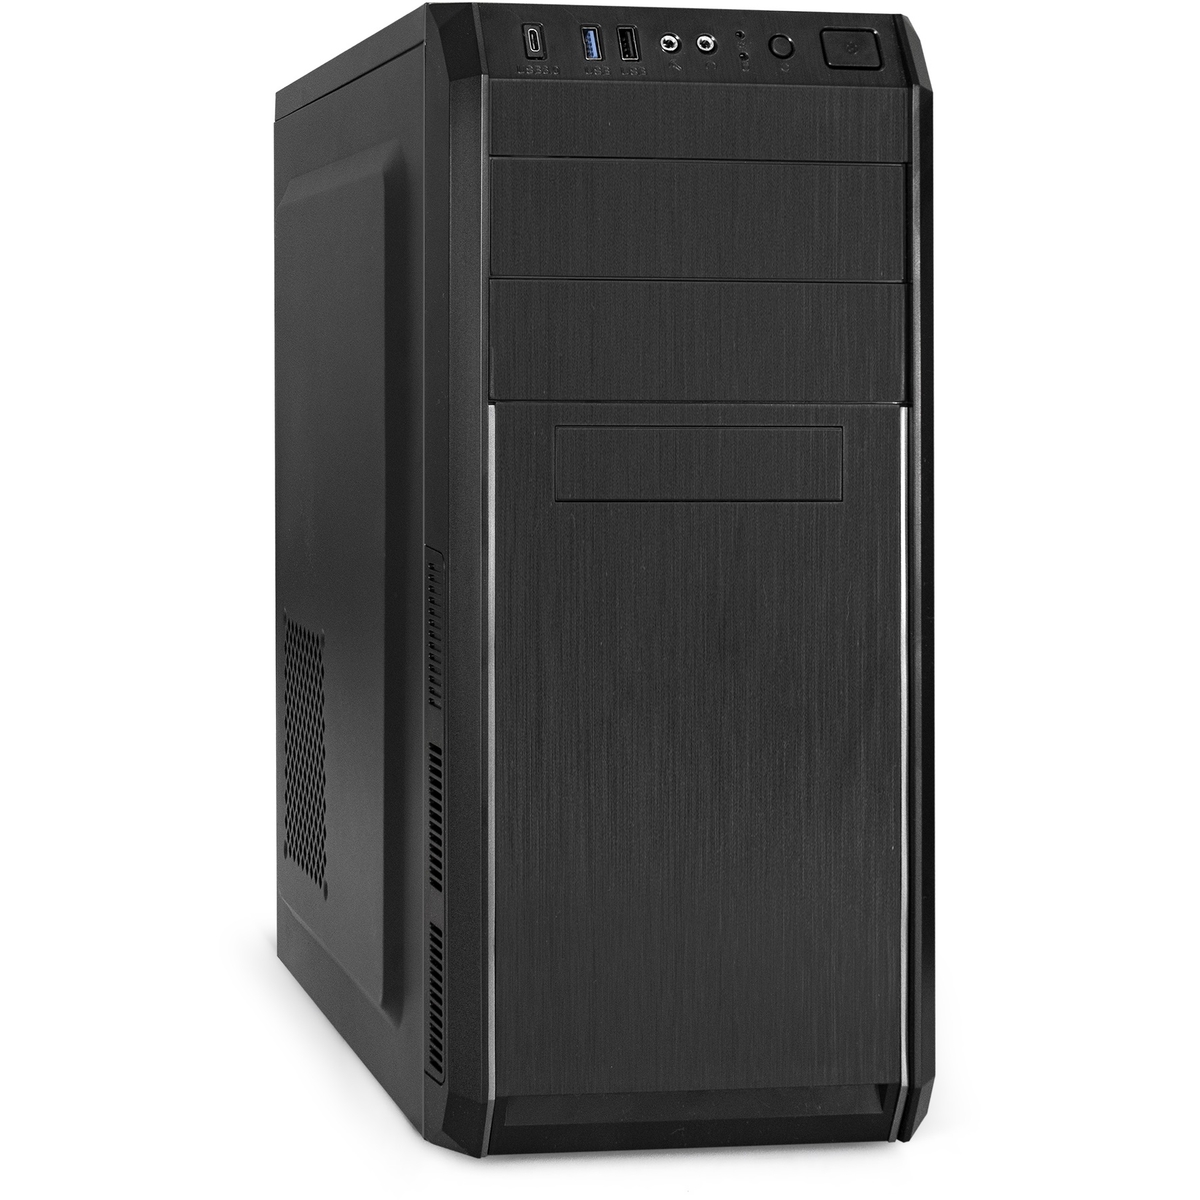  Miditower ExeGate XP-334UC-XP350